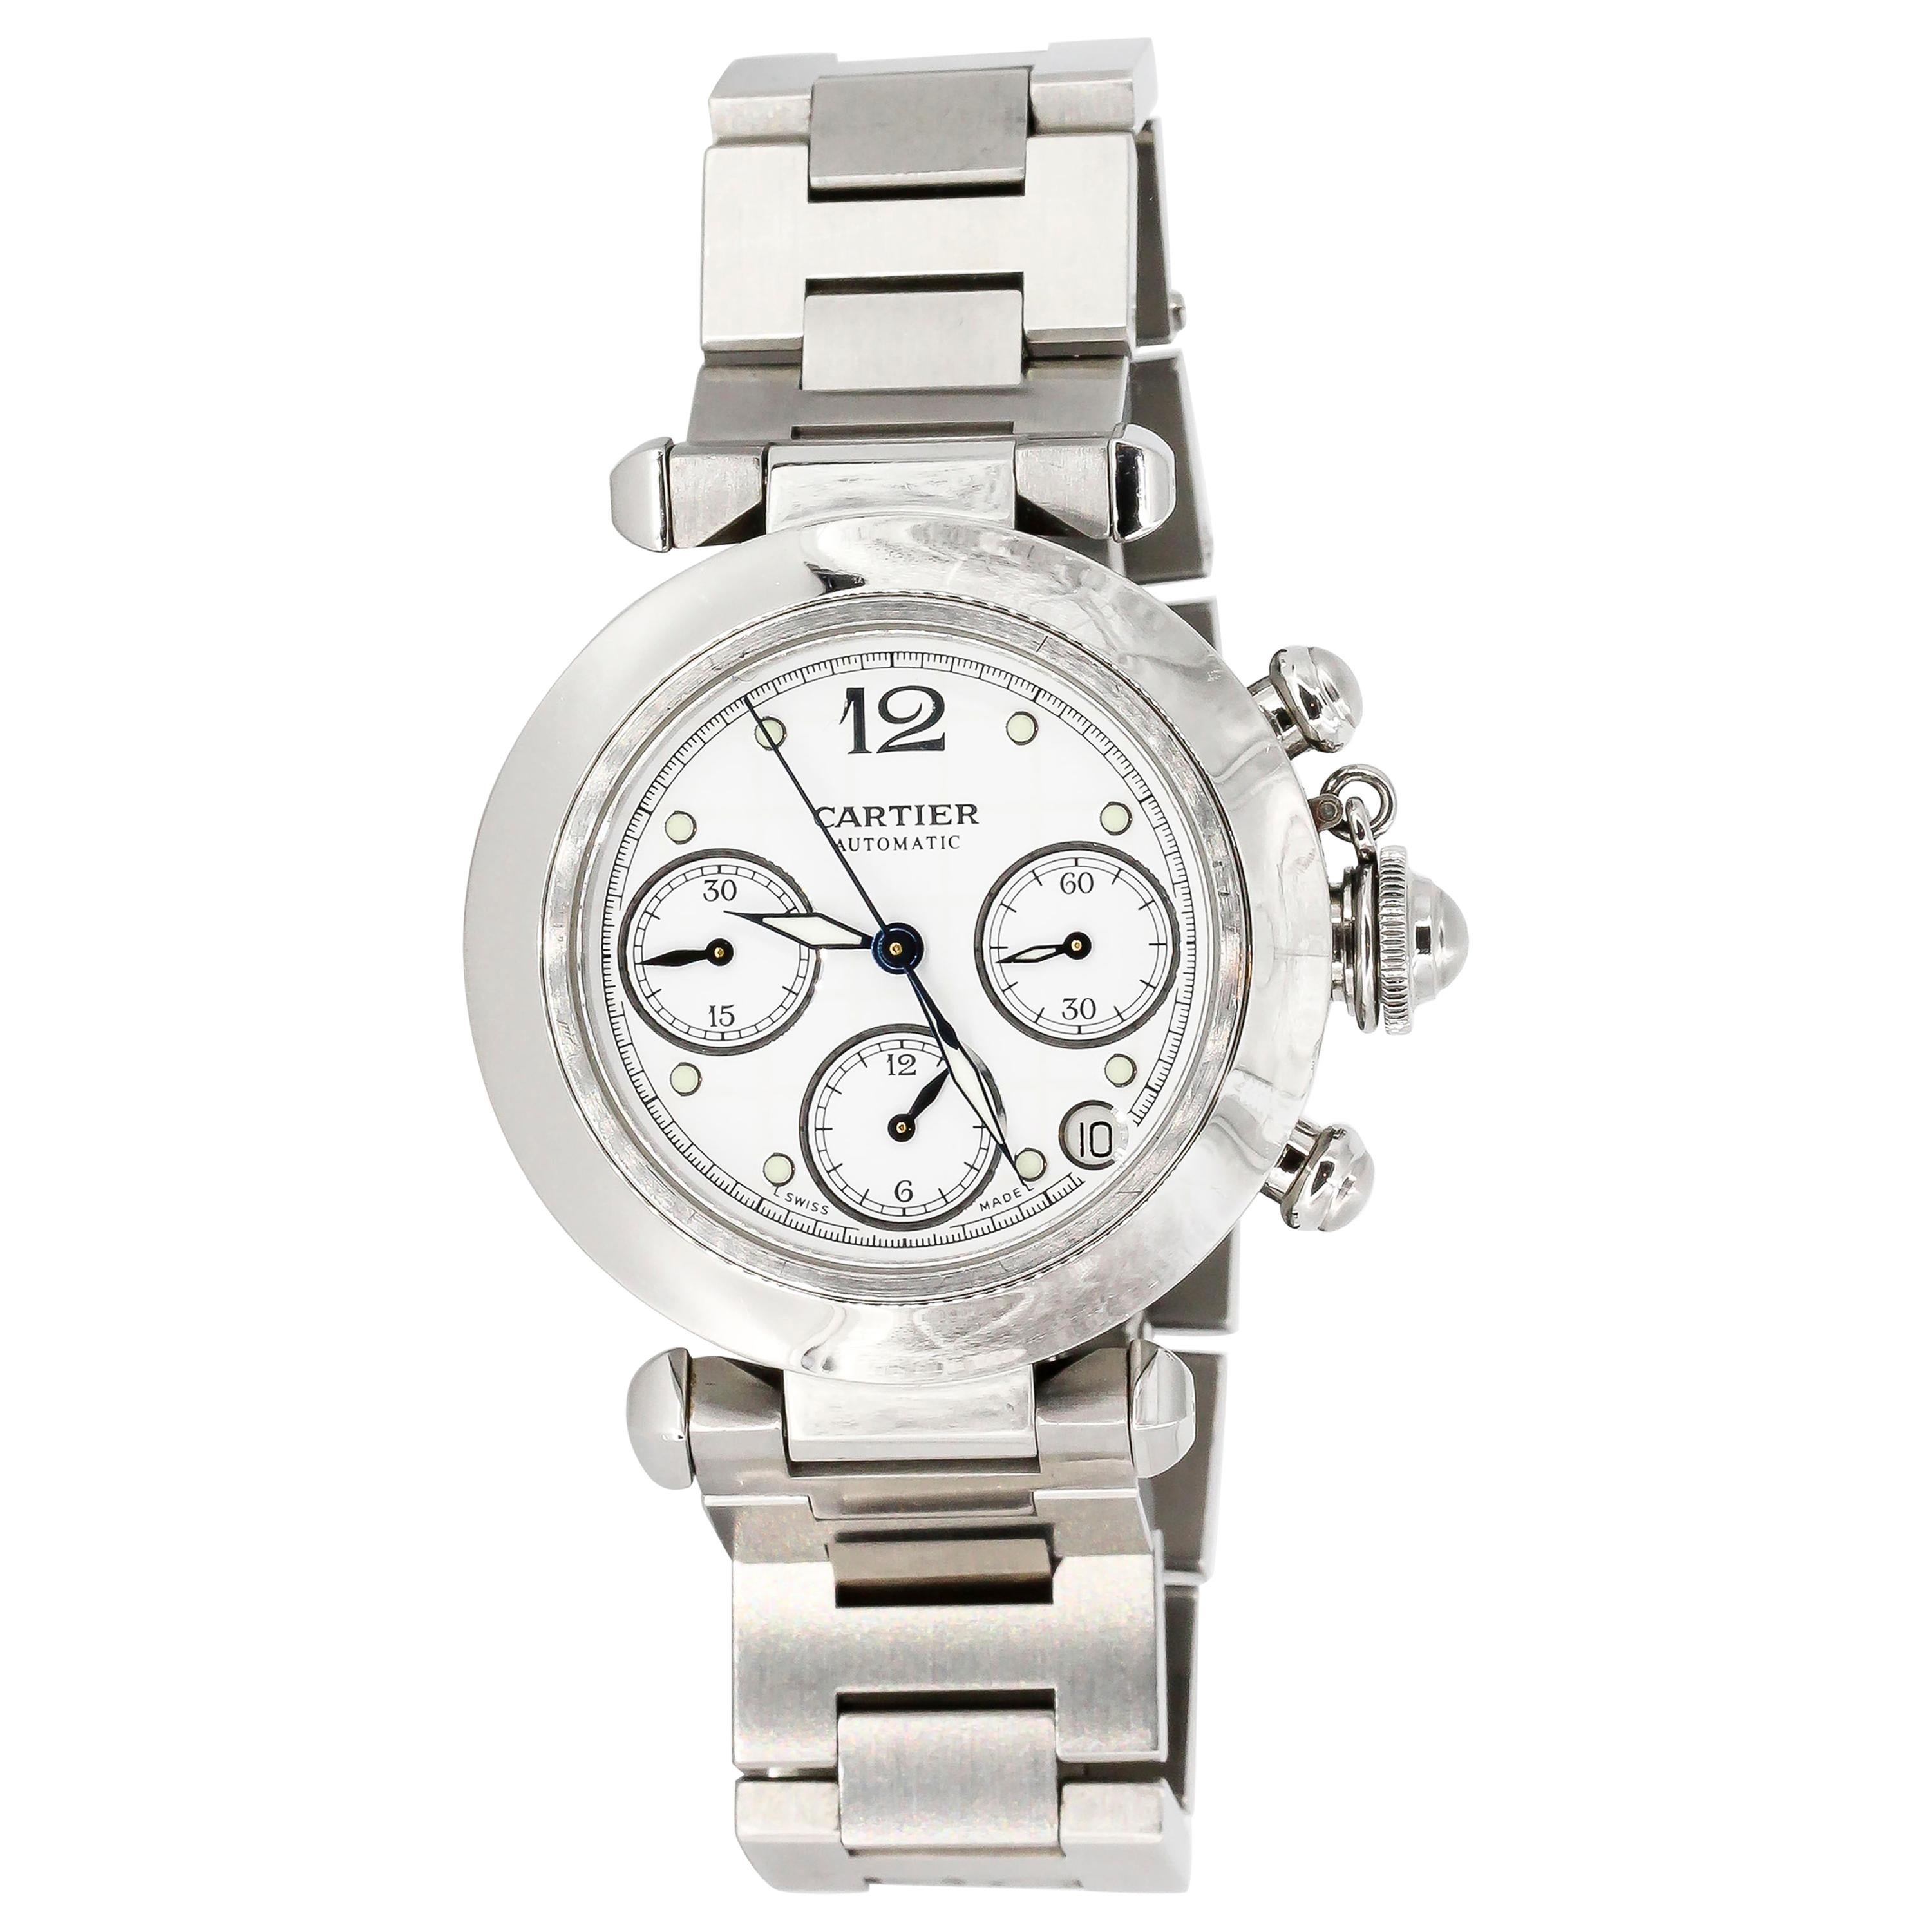 Cartier Pasha Stainless Steel Chronograph Wristwatch